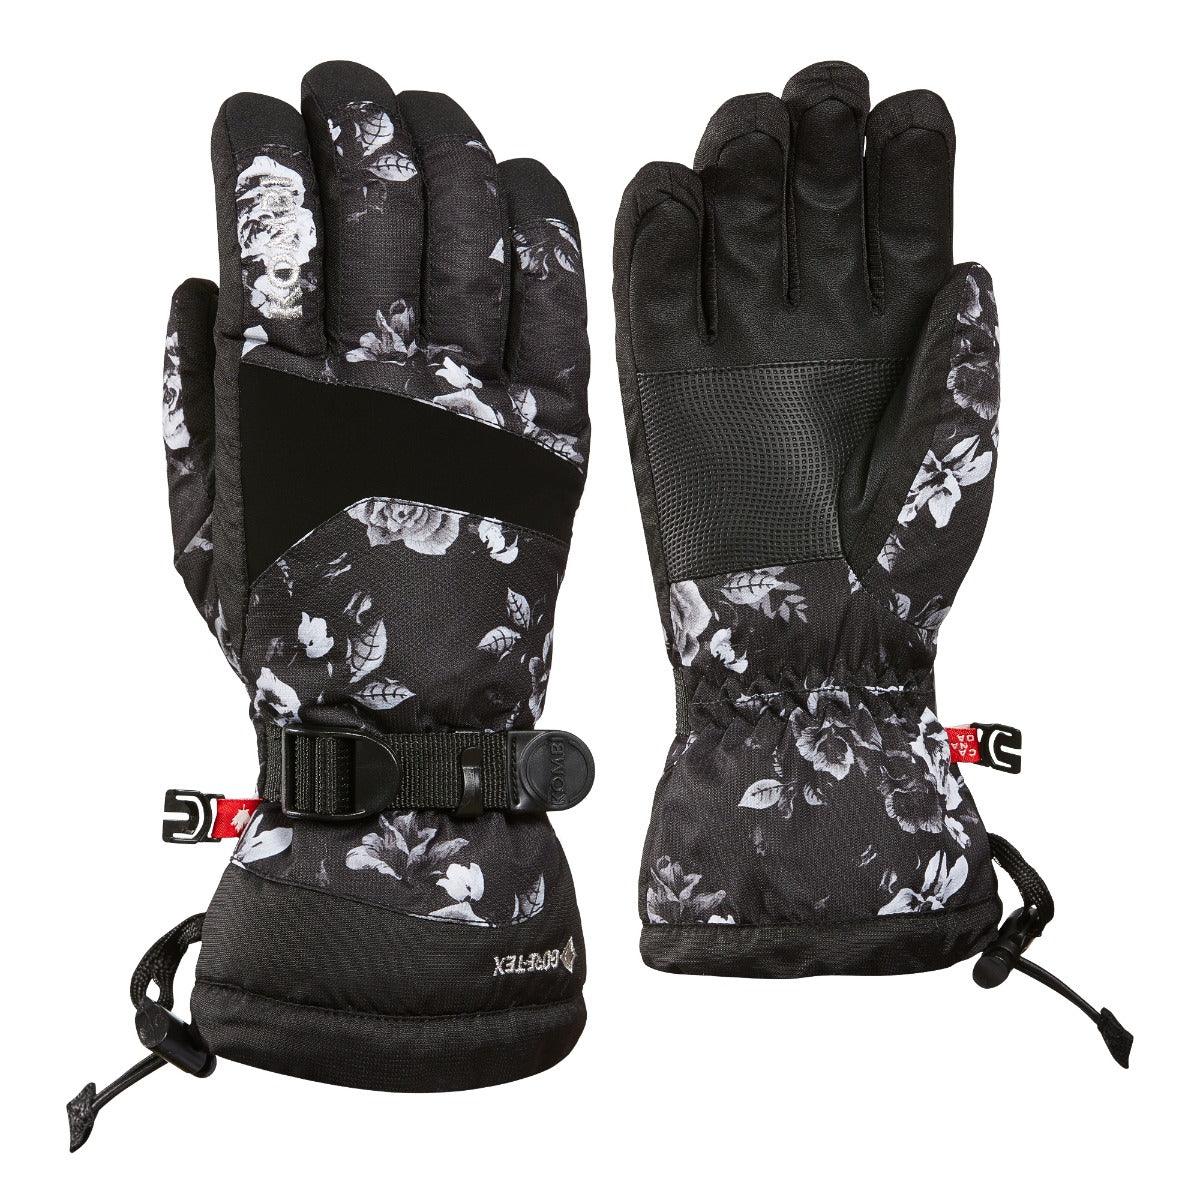 The Edge Glove - Women's - Sports Excellence